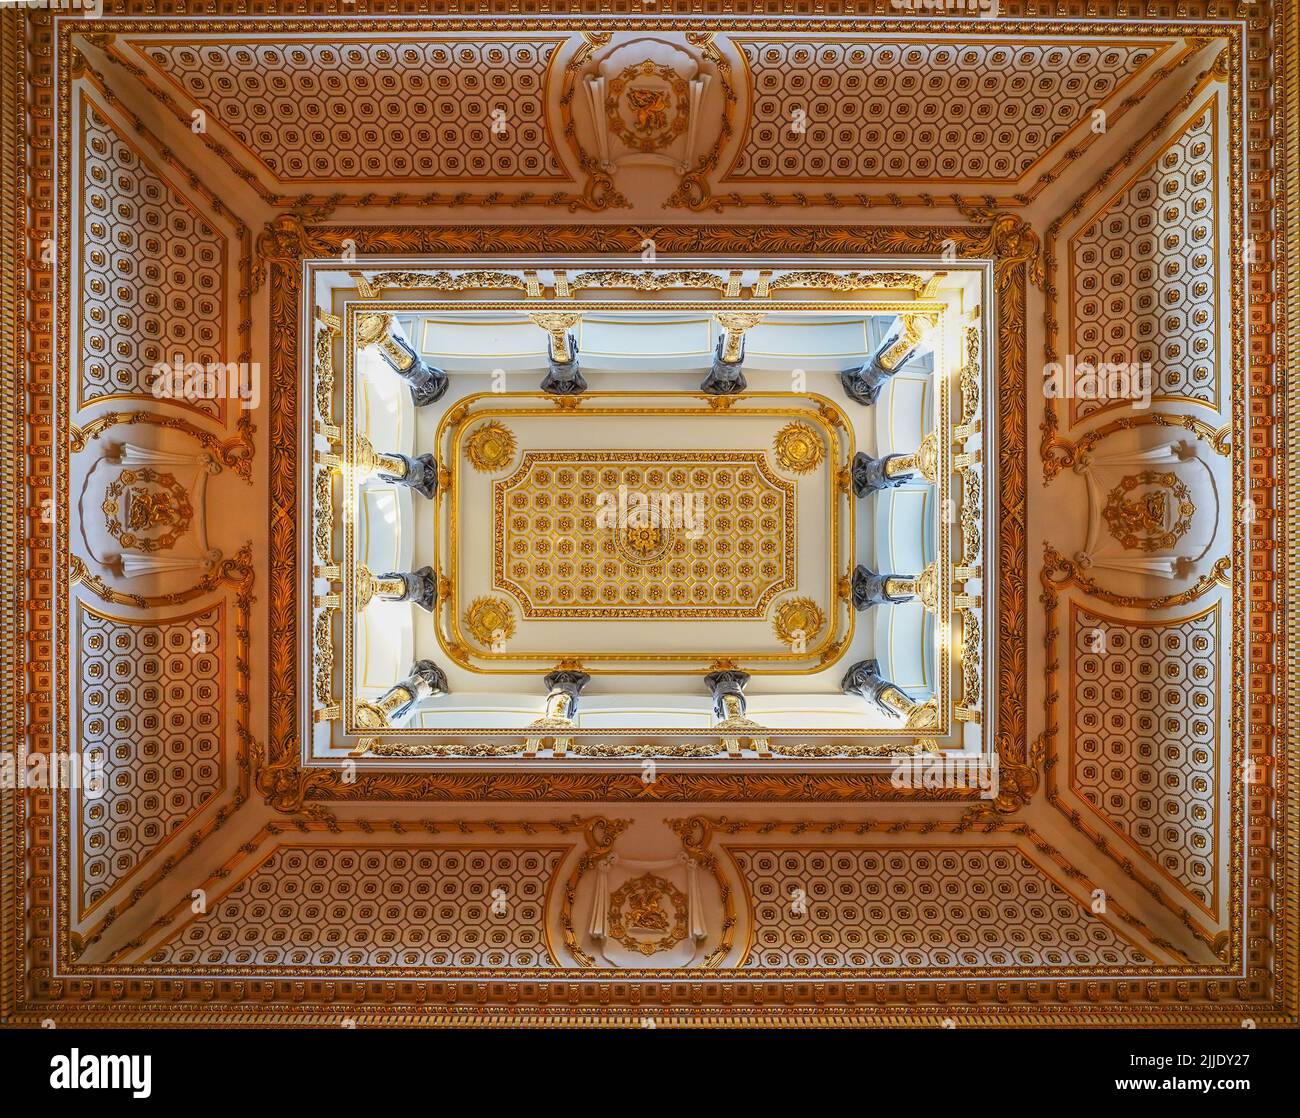 The ceiling of the central lobby of Lancaster House in Mayfair, London, which was used in the filming of The Crown. Photo date: Thursday, March 31, 20 Stock Photo